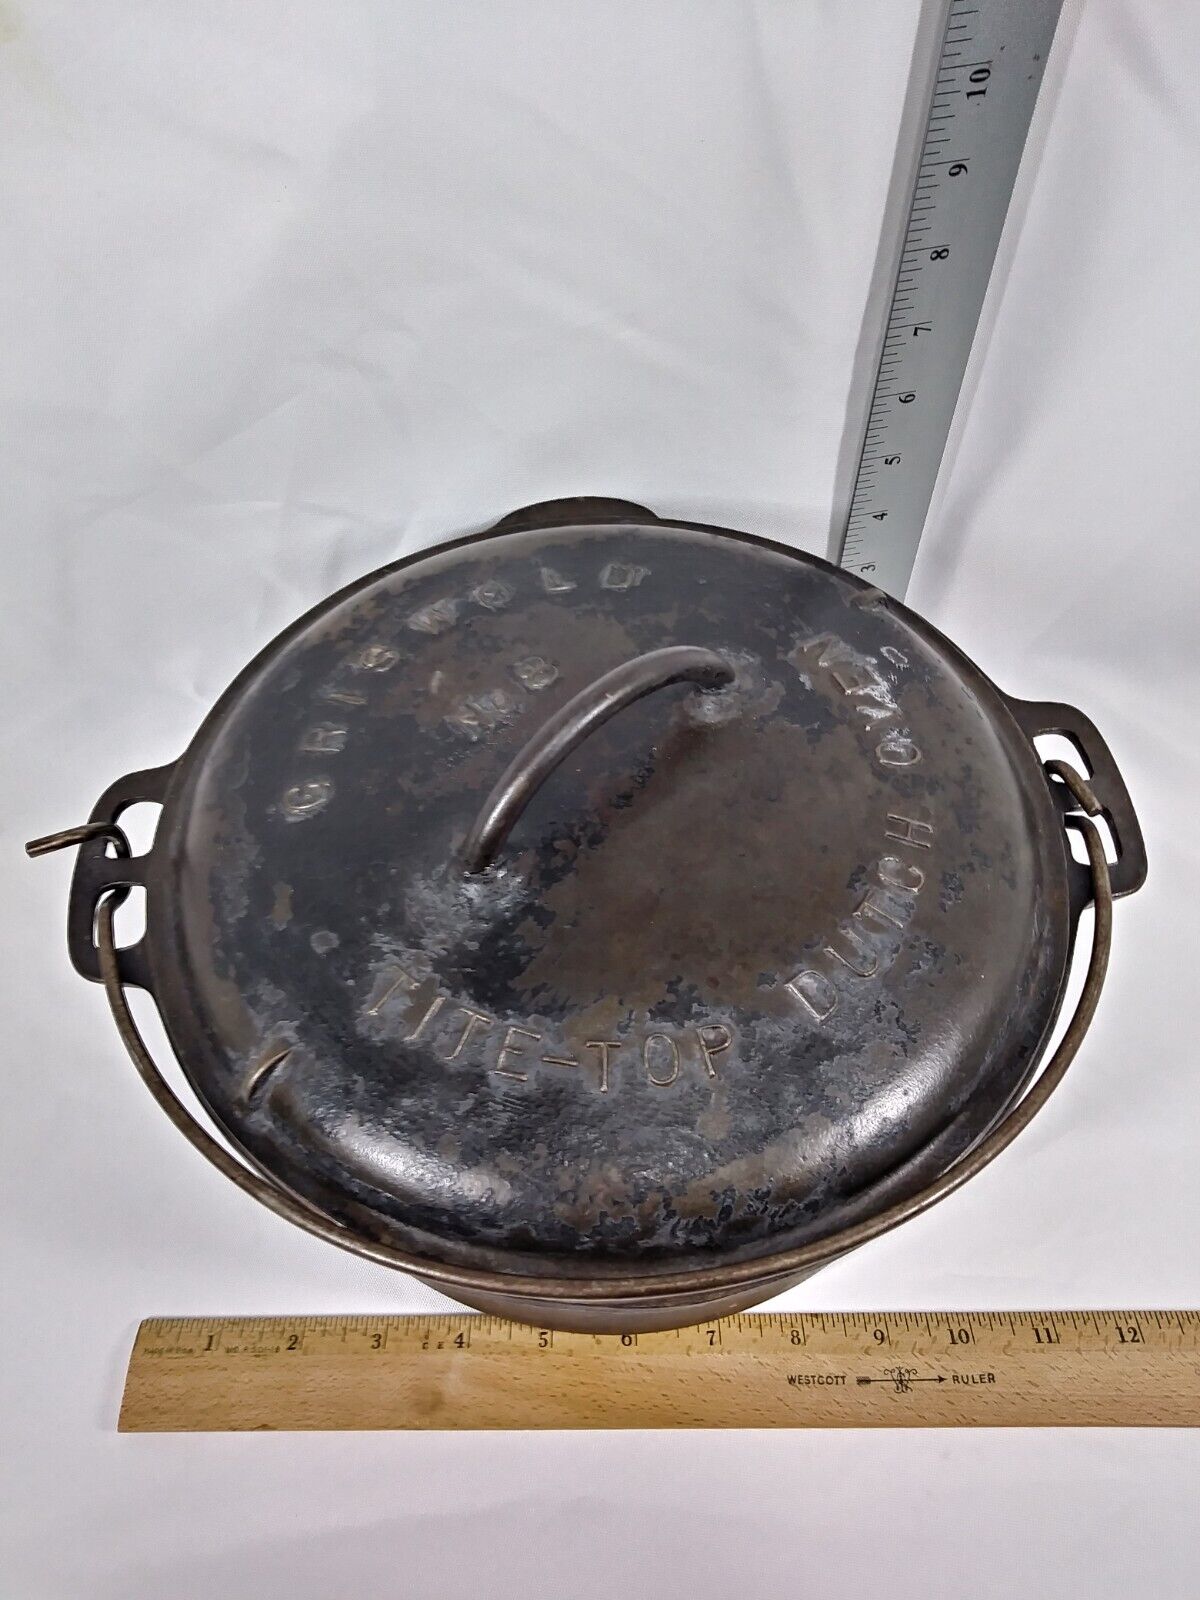 Griswold Cast Iron Dutch Oven No.8 Feb. 10th 1920 A Lid  5QT Bottom Unmarked